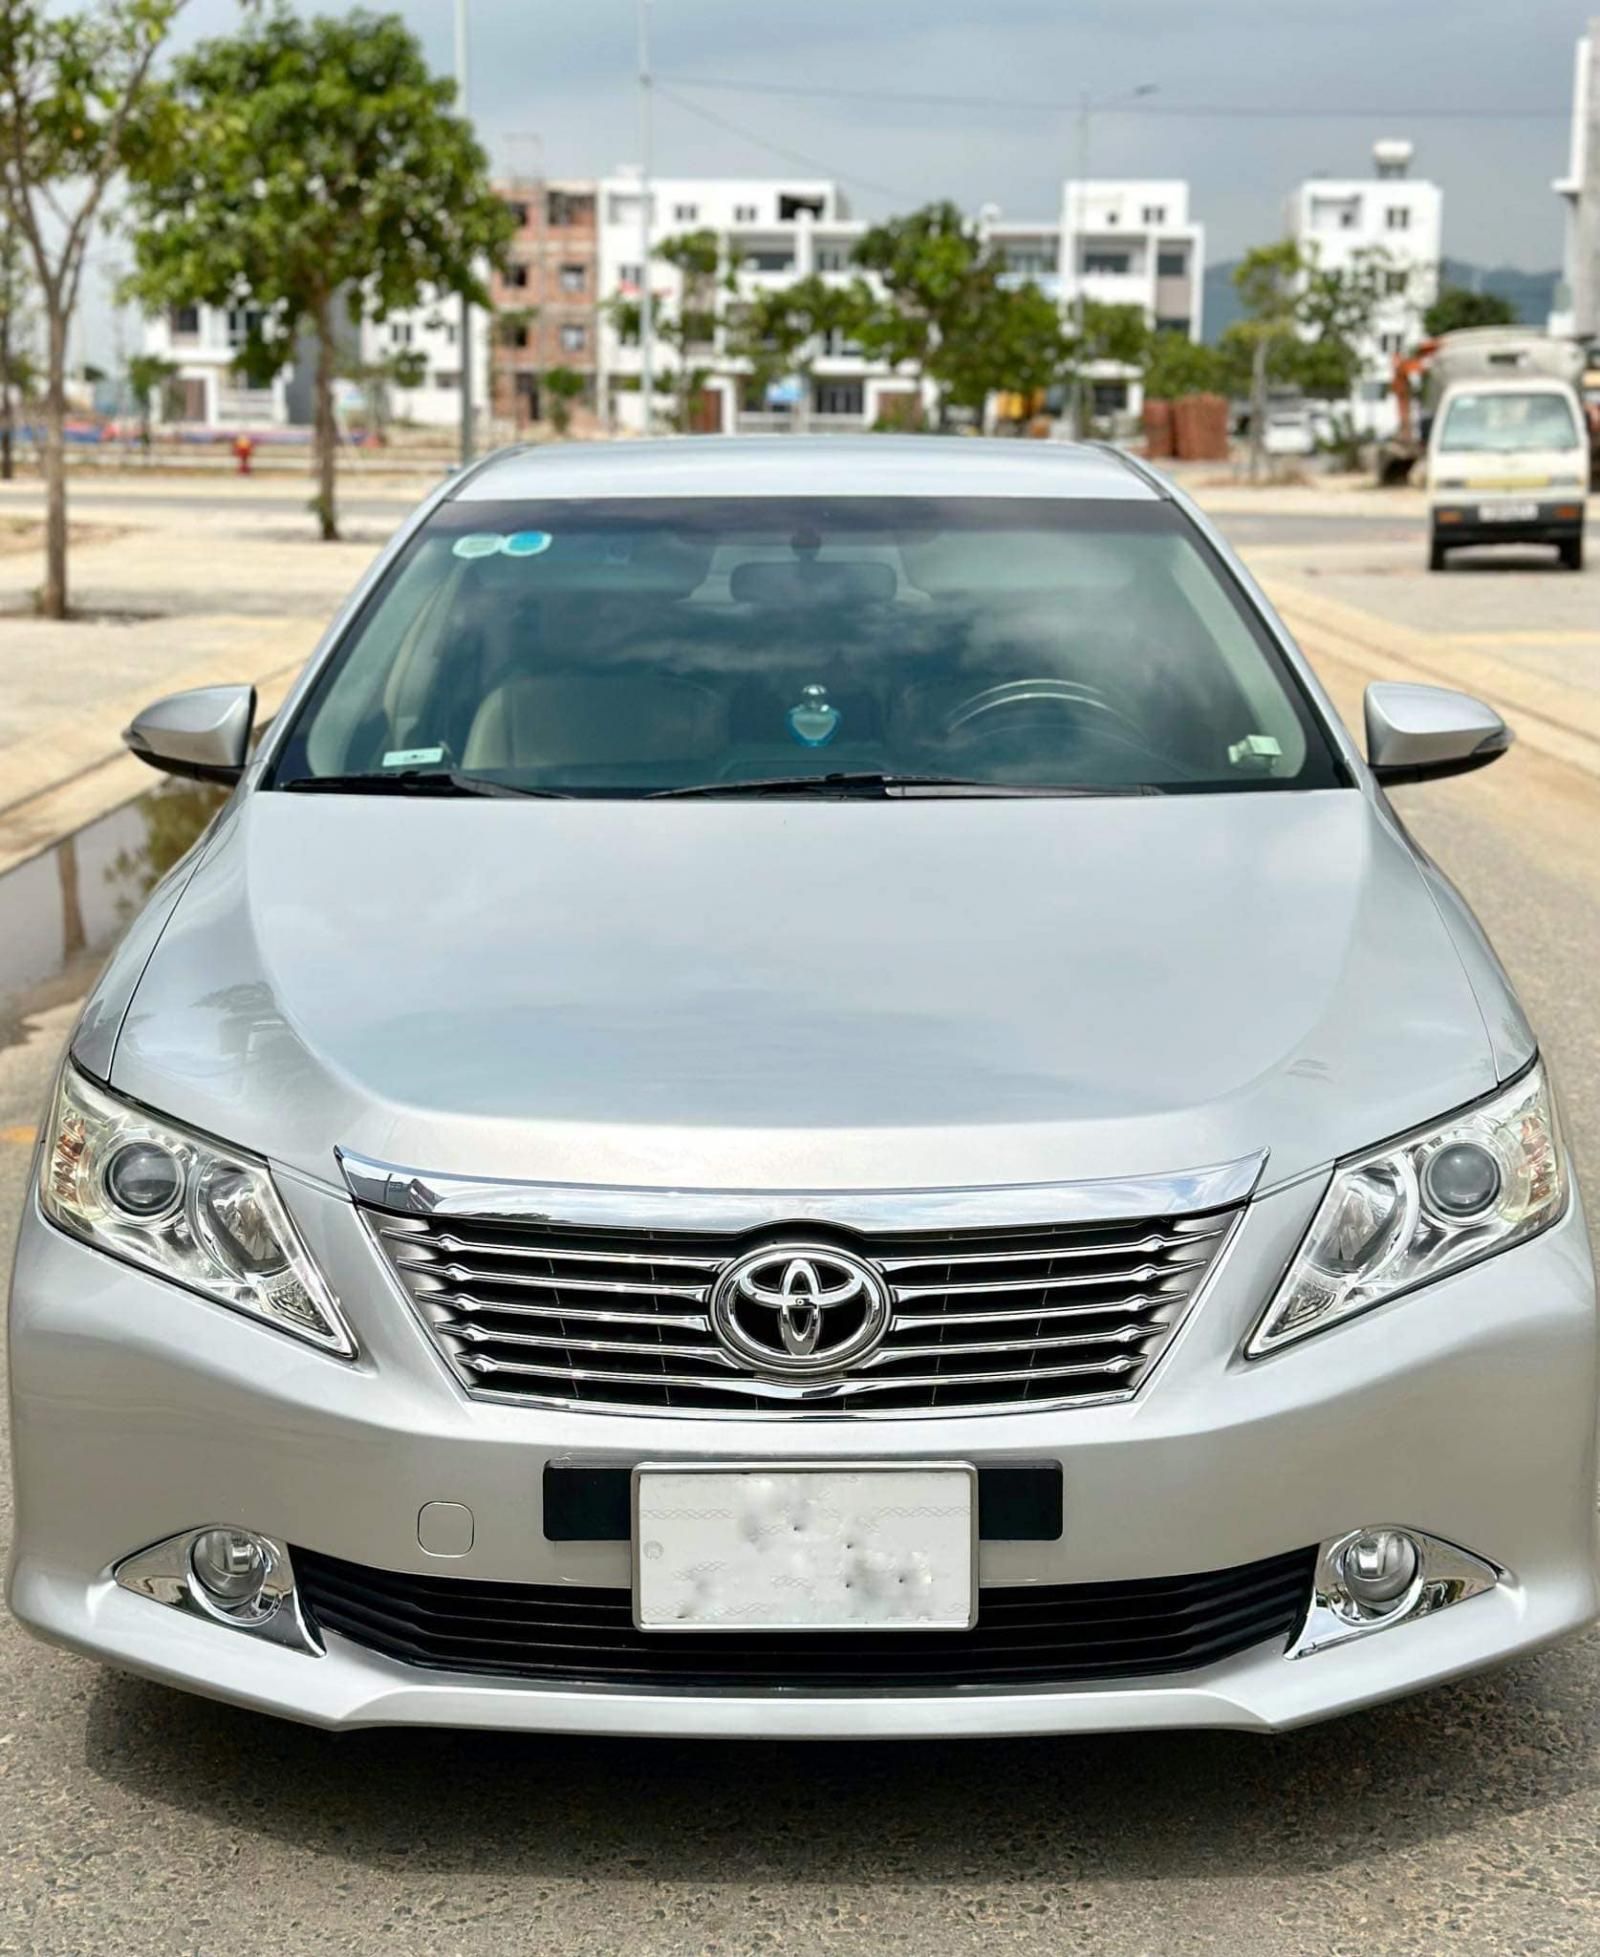 2012 Toyota Camry price in Nigeria  Reviews and Buying Guide